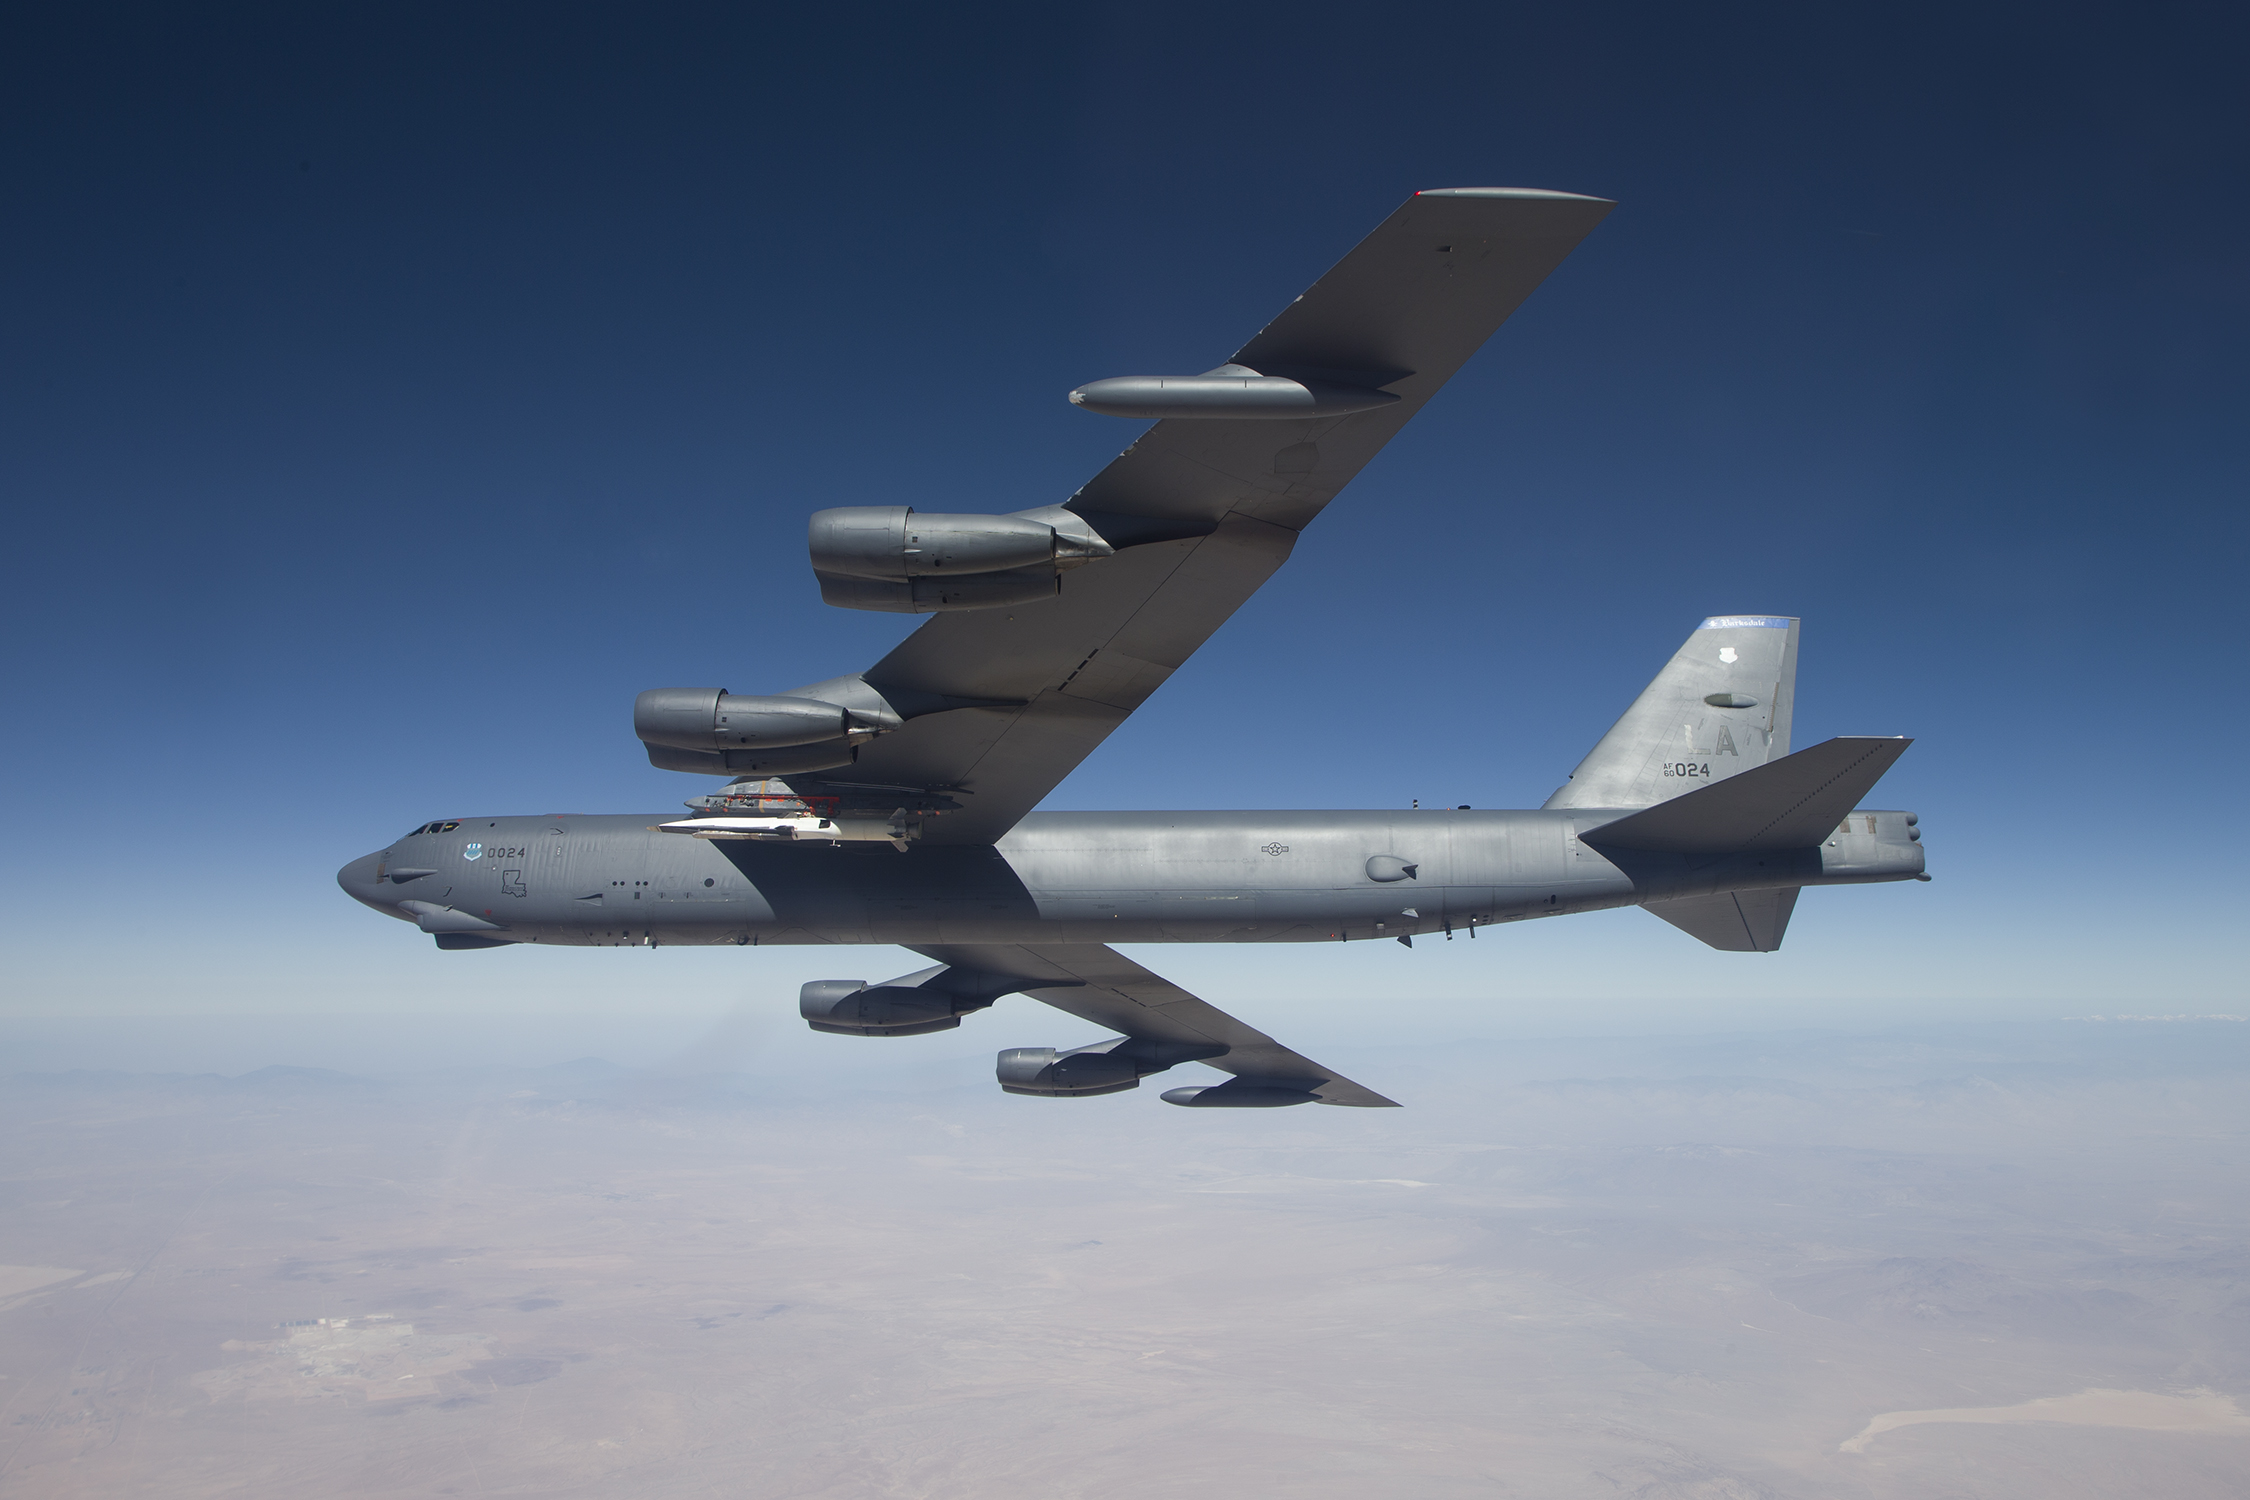 General 2250x1500 airplane military air force aircraft Boeing B-52 Stratofortress military vehicle vehicle military aircraft Boeing American aircraft flying